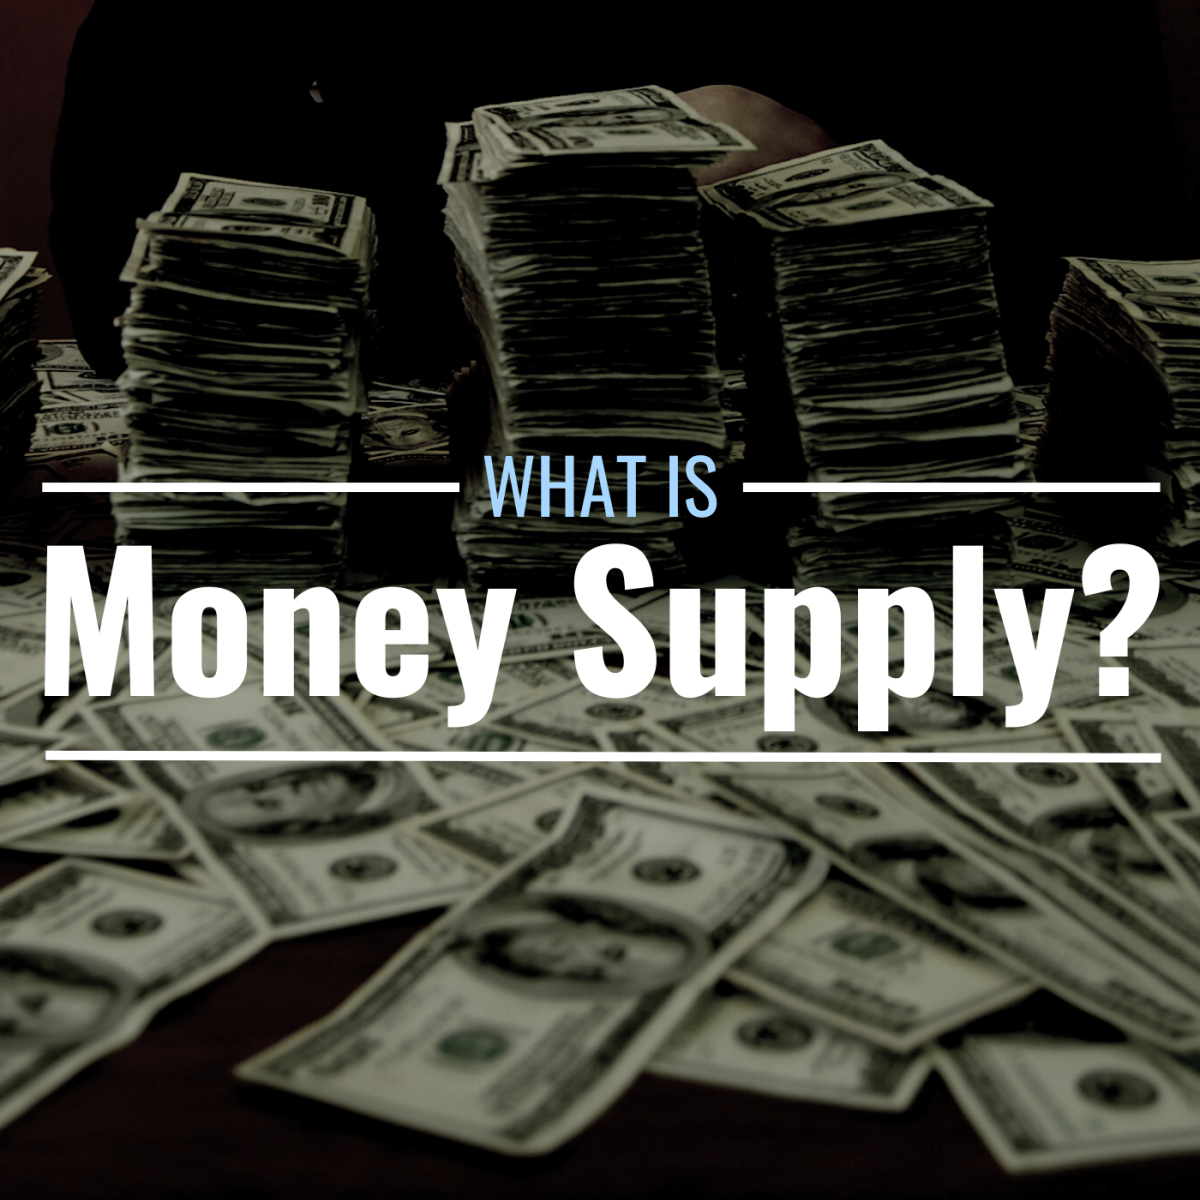 Photo of piles of U.S. dollar bills with text overlay that reads "What Is Money Supply?"